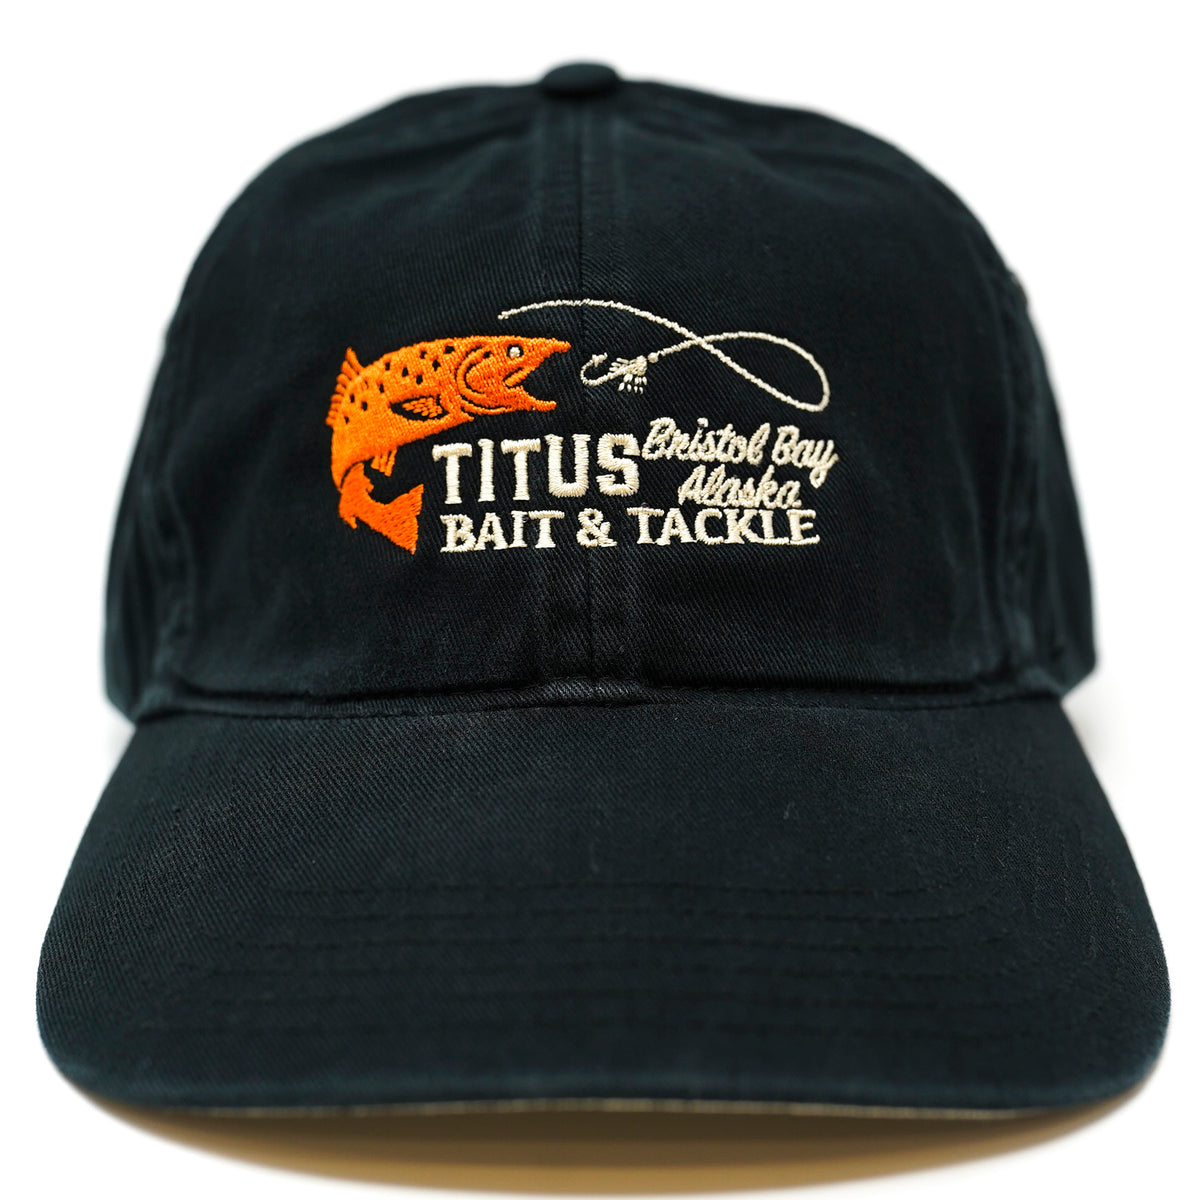 Titus Bristol Bay Bait and Tackle - Chino Washed Polo Hat